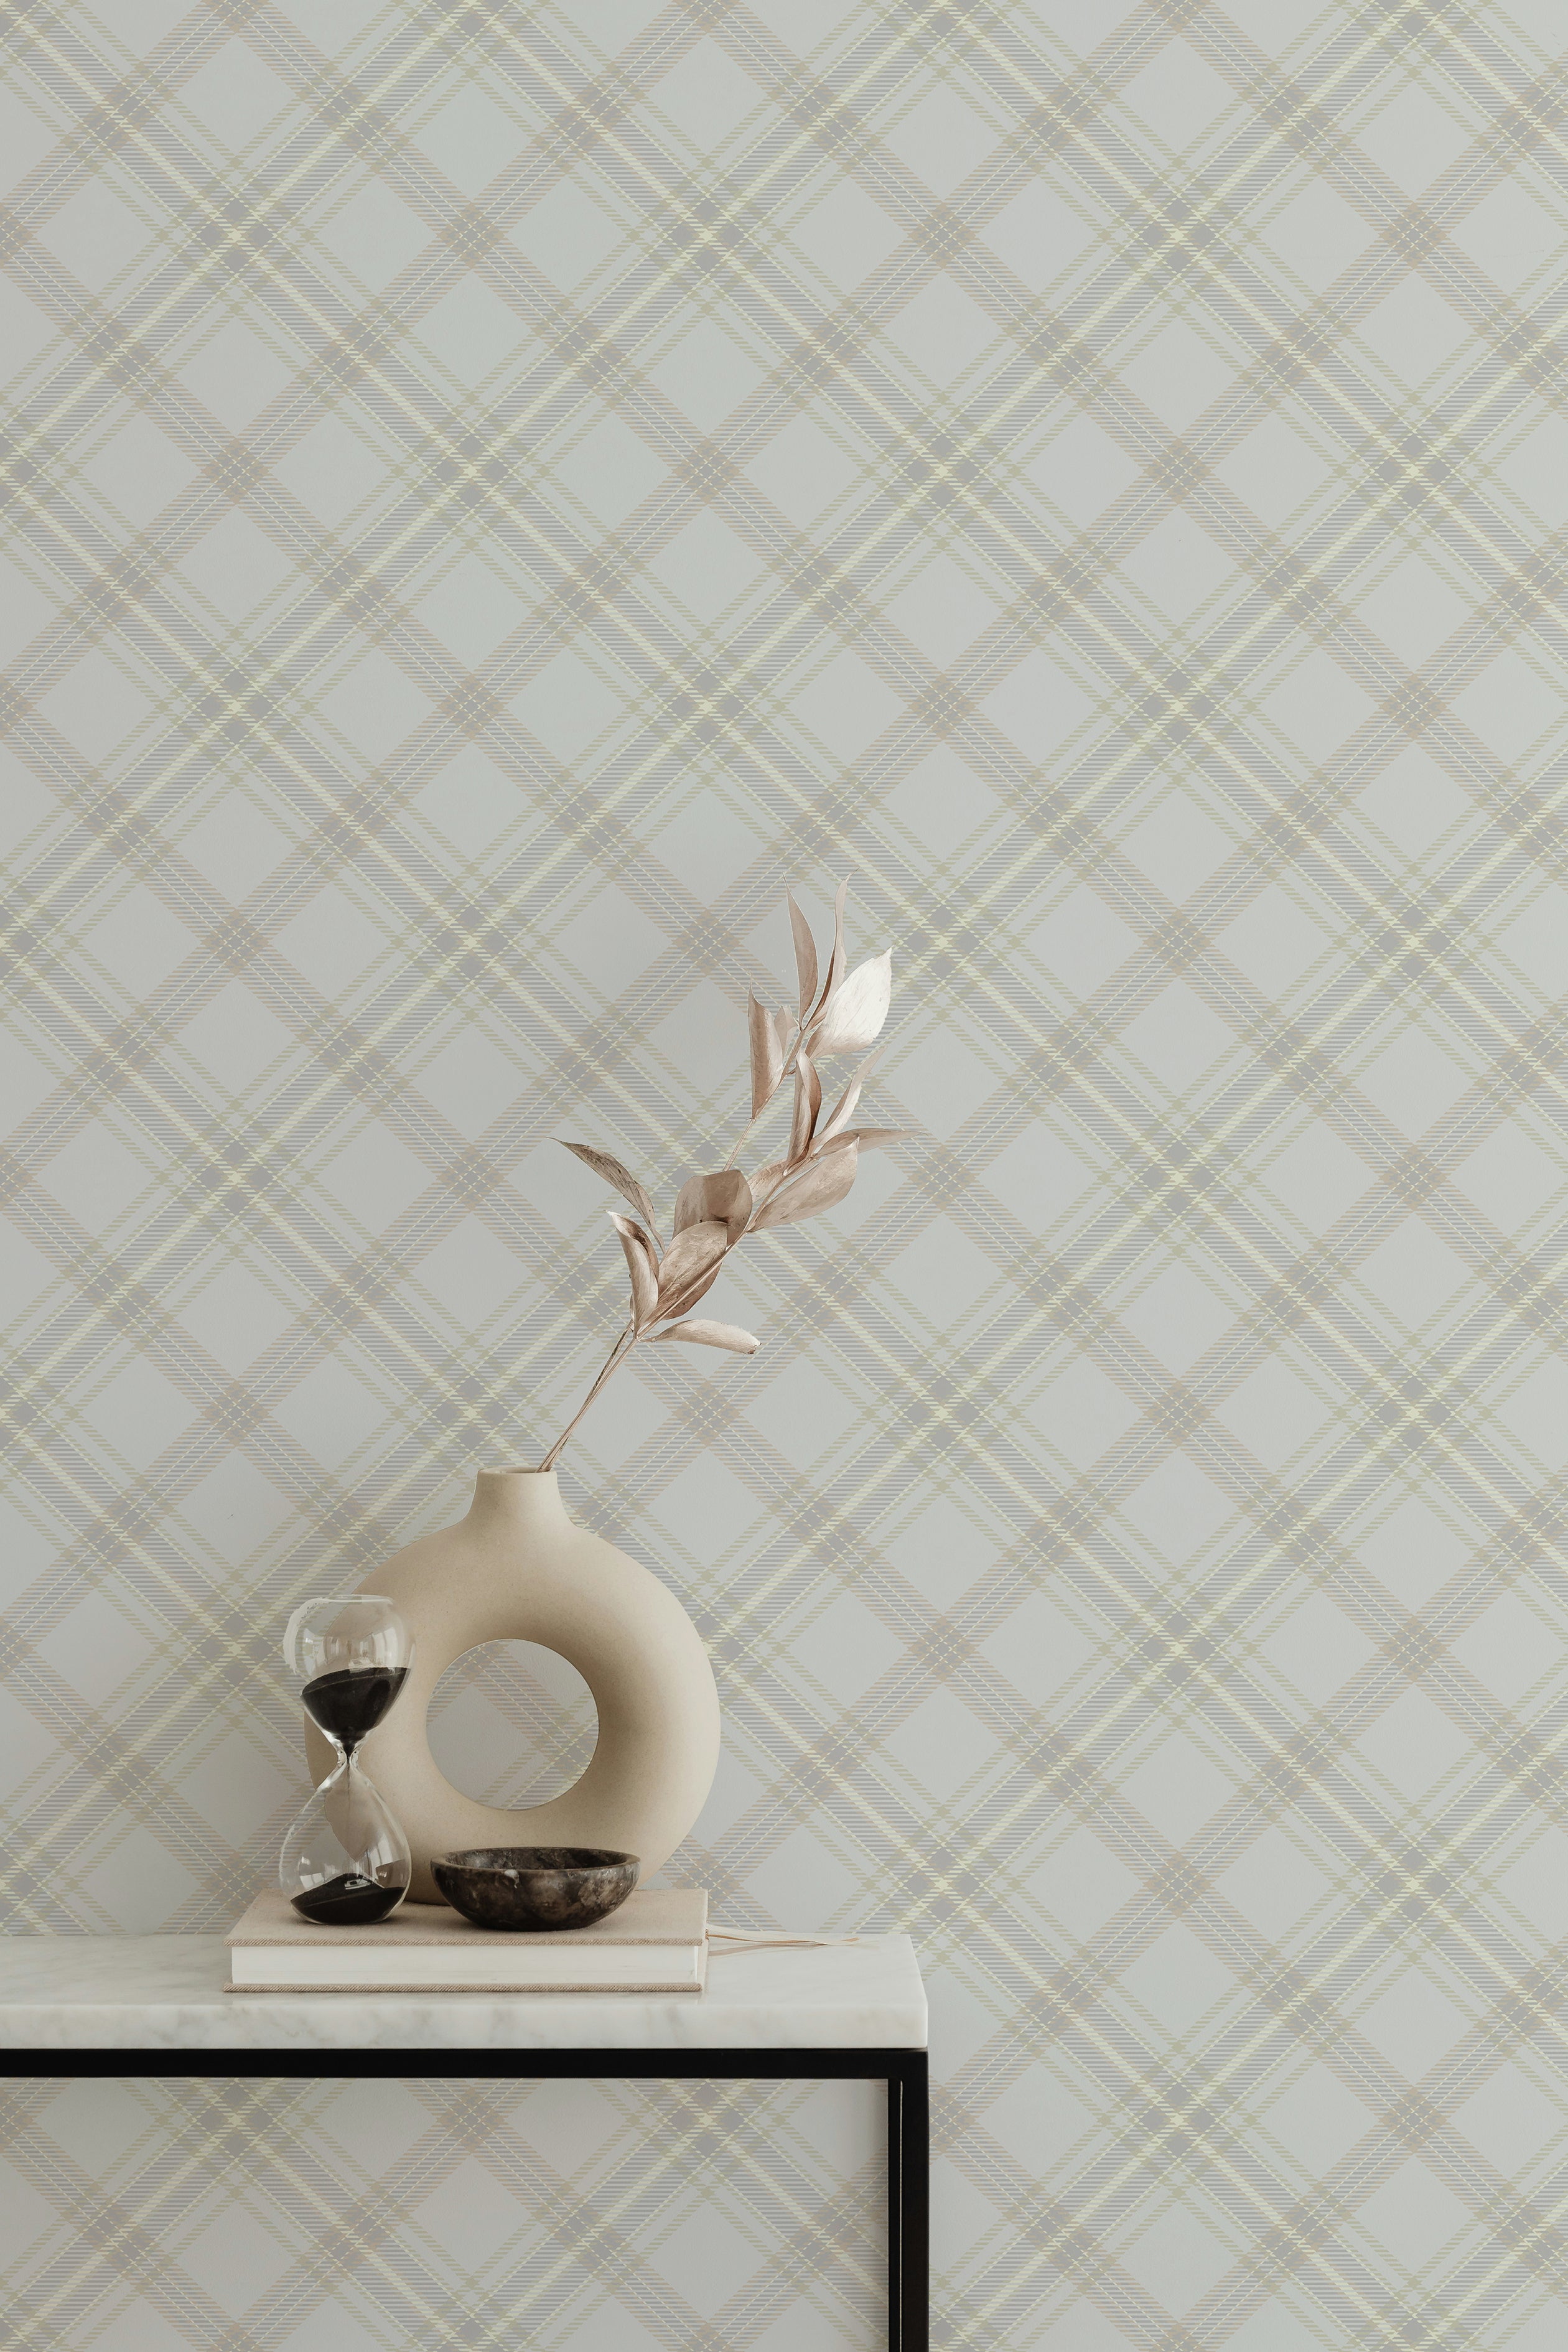 Royal Tartan Plaid Wallpaper with a classic tartan design in neutral beige and cream shades. The wallpaper adds a touch of traditional charm to the space, paired with a contemporary round vase and an hourglass timer on a sleek white table.